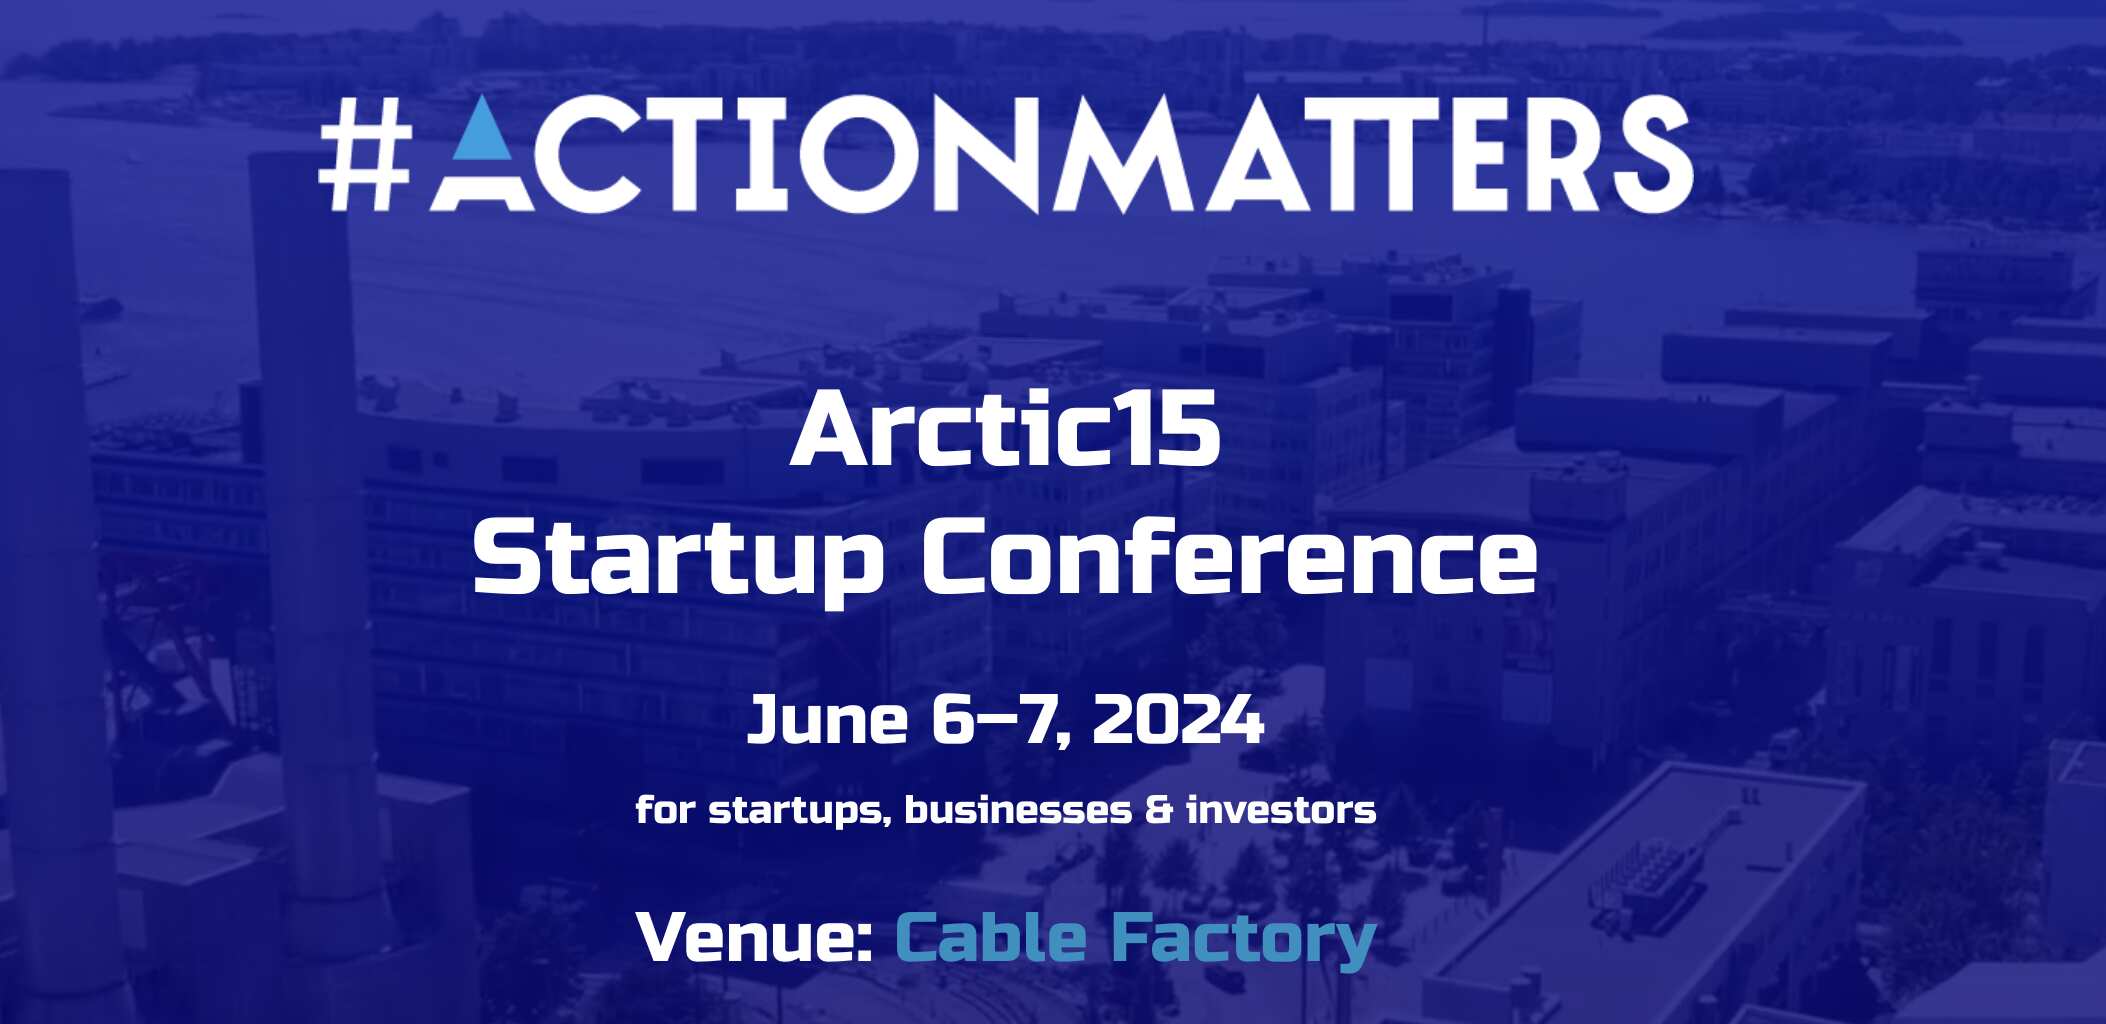 The event banner of Arctic15 Startup Conference for 2024